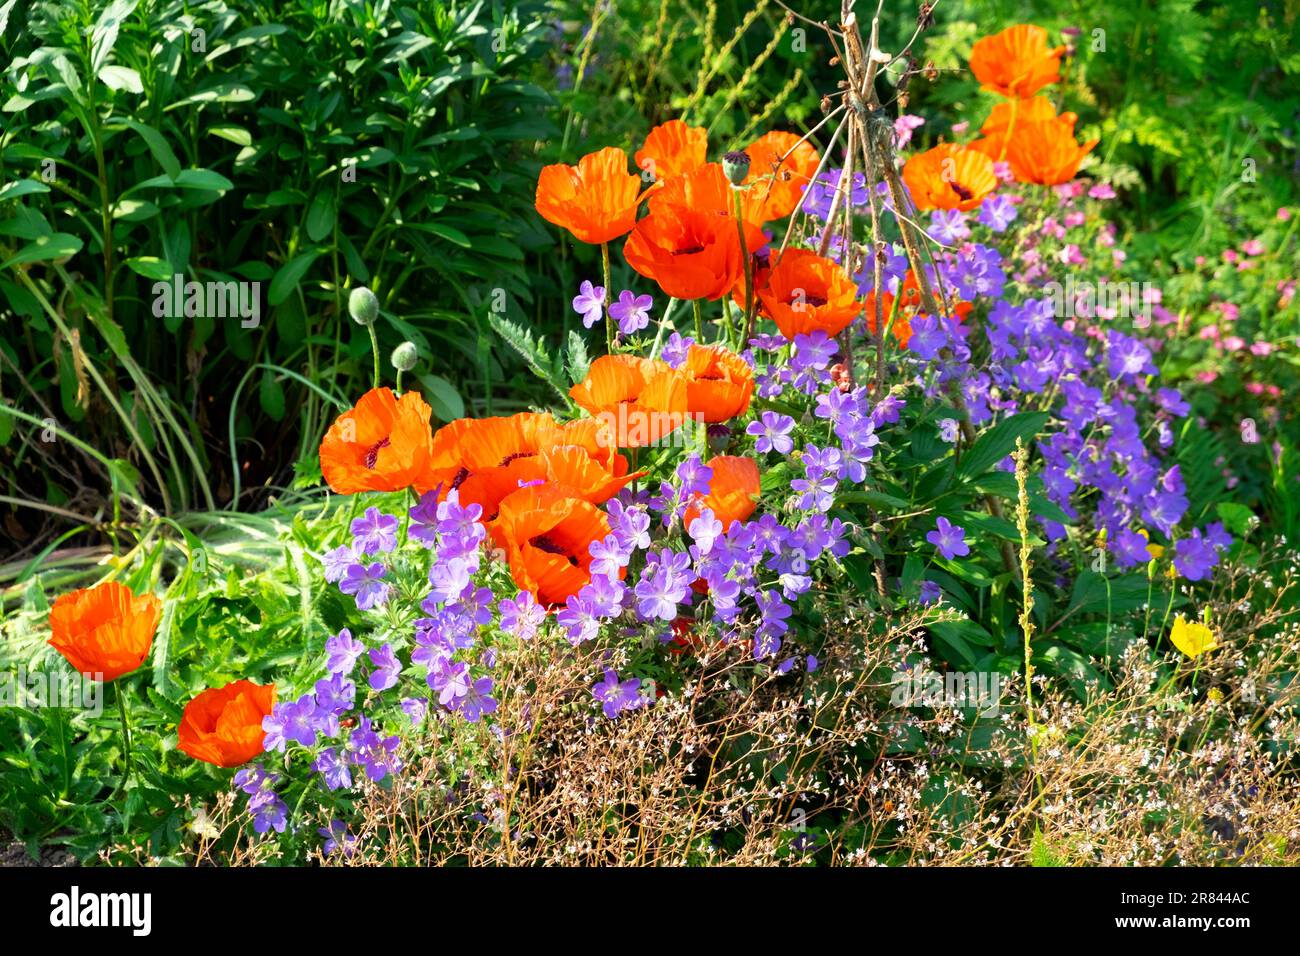 Red poppies and blue purple Johnsons geranium flowers in summer bloom in June country garden in Carmarthenshire Wales UK Great Britain    KATHY DEWITT Stock Photo